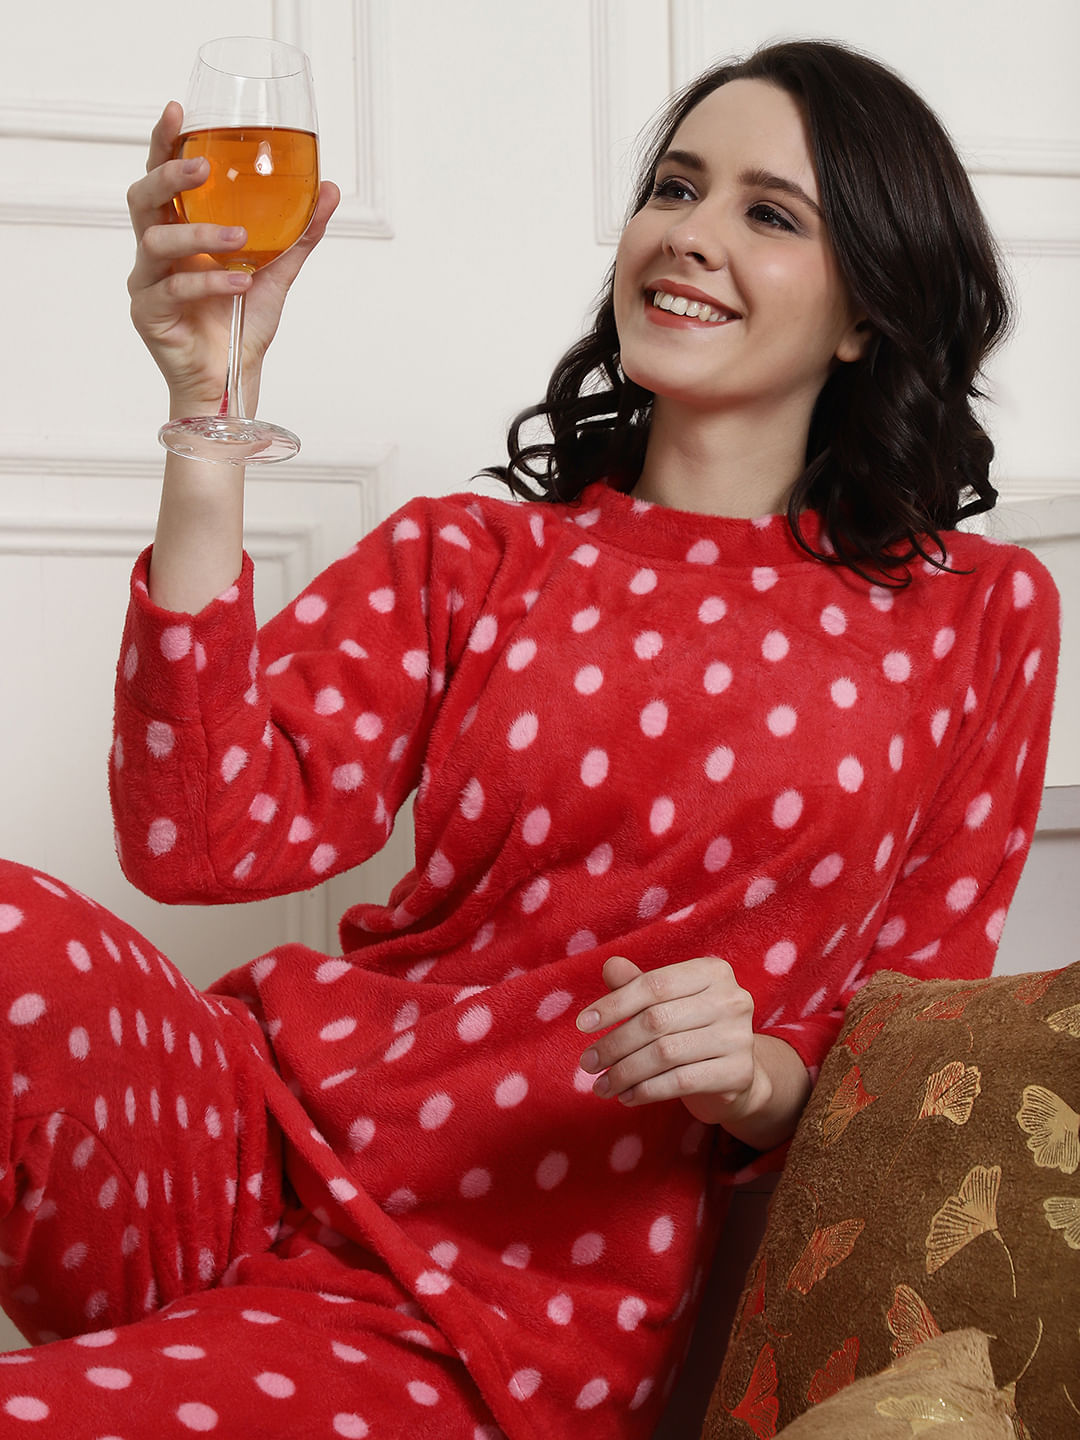 Red Polka Dots Winter Night Suit